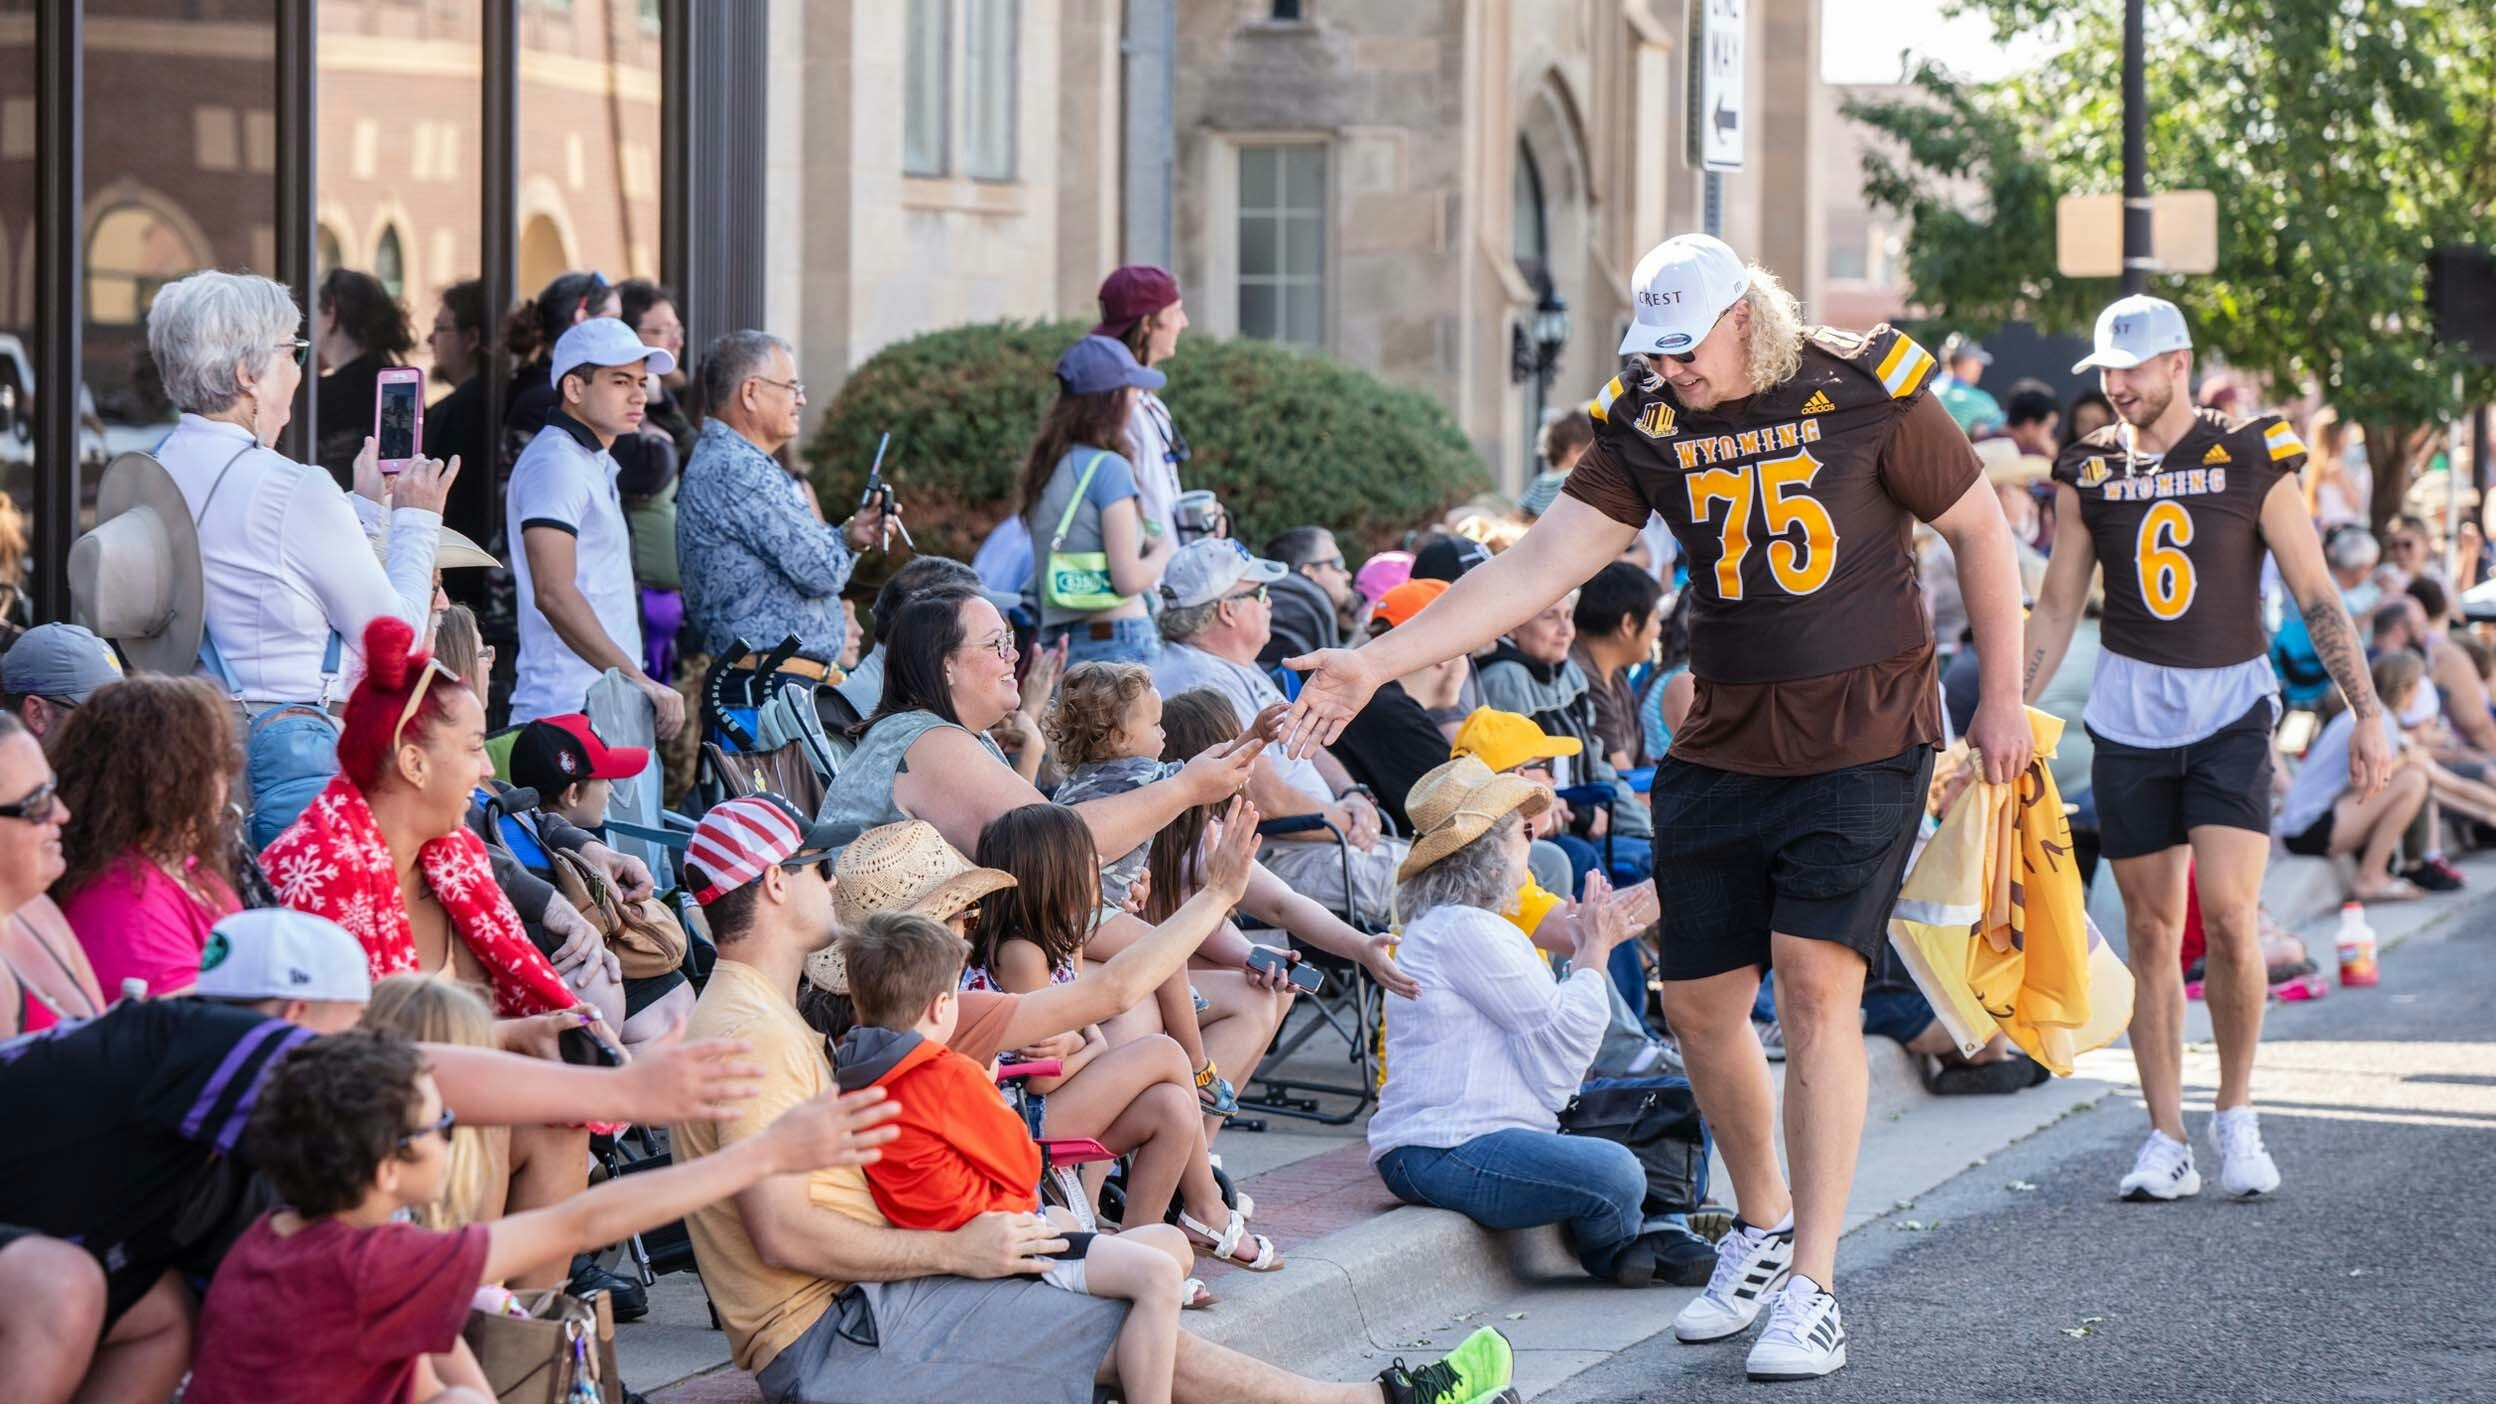 University of Wyoming Football Players, Frank Crum and Andrew Peasley high-five parade watchers at the Cheyenne Frontier Days Parade on July 29, 2023 in downtown Cheyenne.